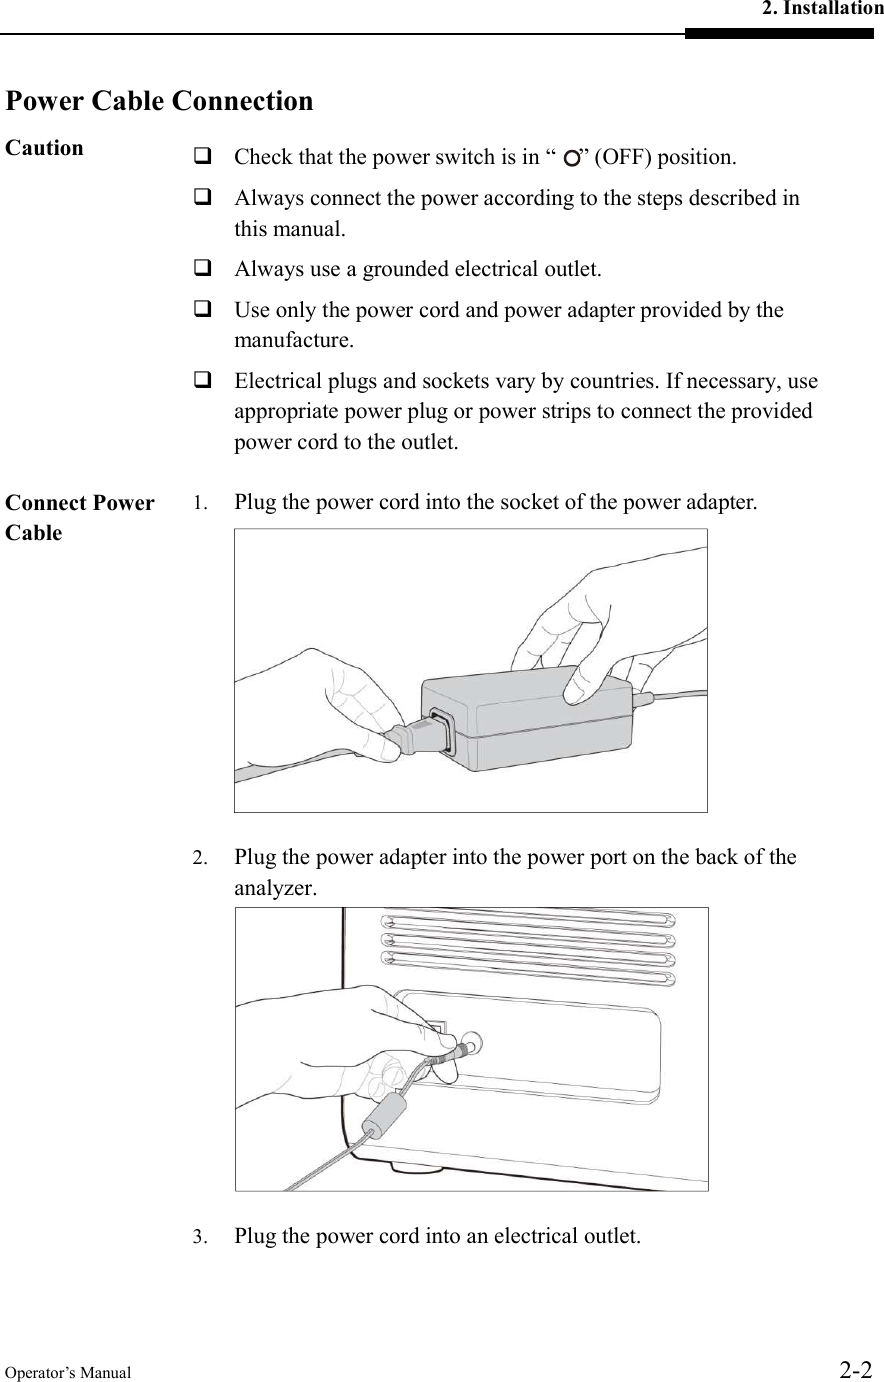 2. Installation Operator’s Manual  2-2  Power Cable ConnectionCaution   Check that the power switch is in “    ” (OFF) position.    Always connect the power according to the steps described in this manual.  Always use a grounded electrical outlet.  Use only the power cord and power adapter provided by the manufacture.  Electrical plugs and sockets vary by countries. If necessary, use appropriate power plug or power strips to connect the provided power cord to the outlet.  Connect Power Cable  1. Plug the power cord into the socket of the power adapter.  2. Plug the power adapter into the power port on the back of the analyzer.  3. Plug the power cord into an electrical outlet. 